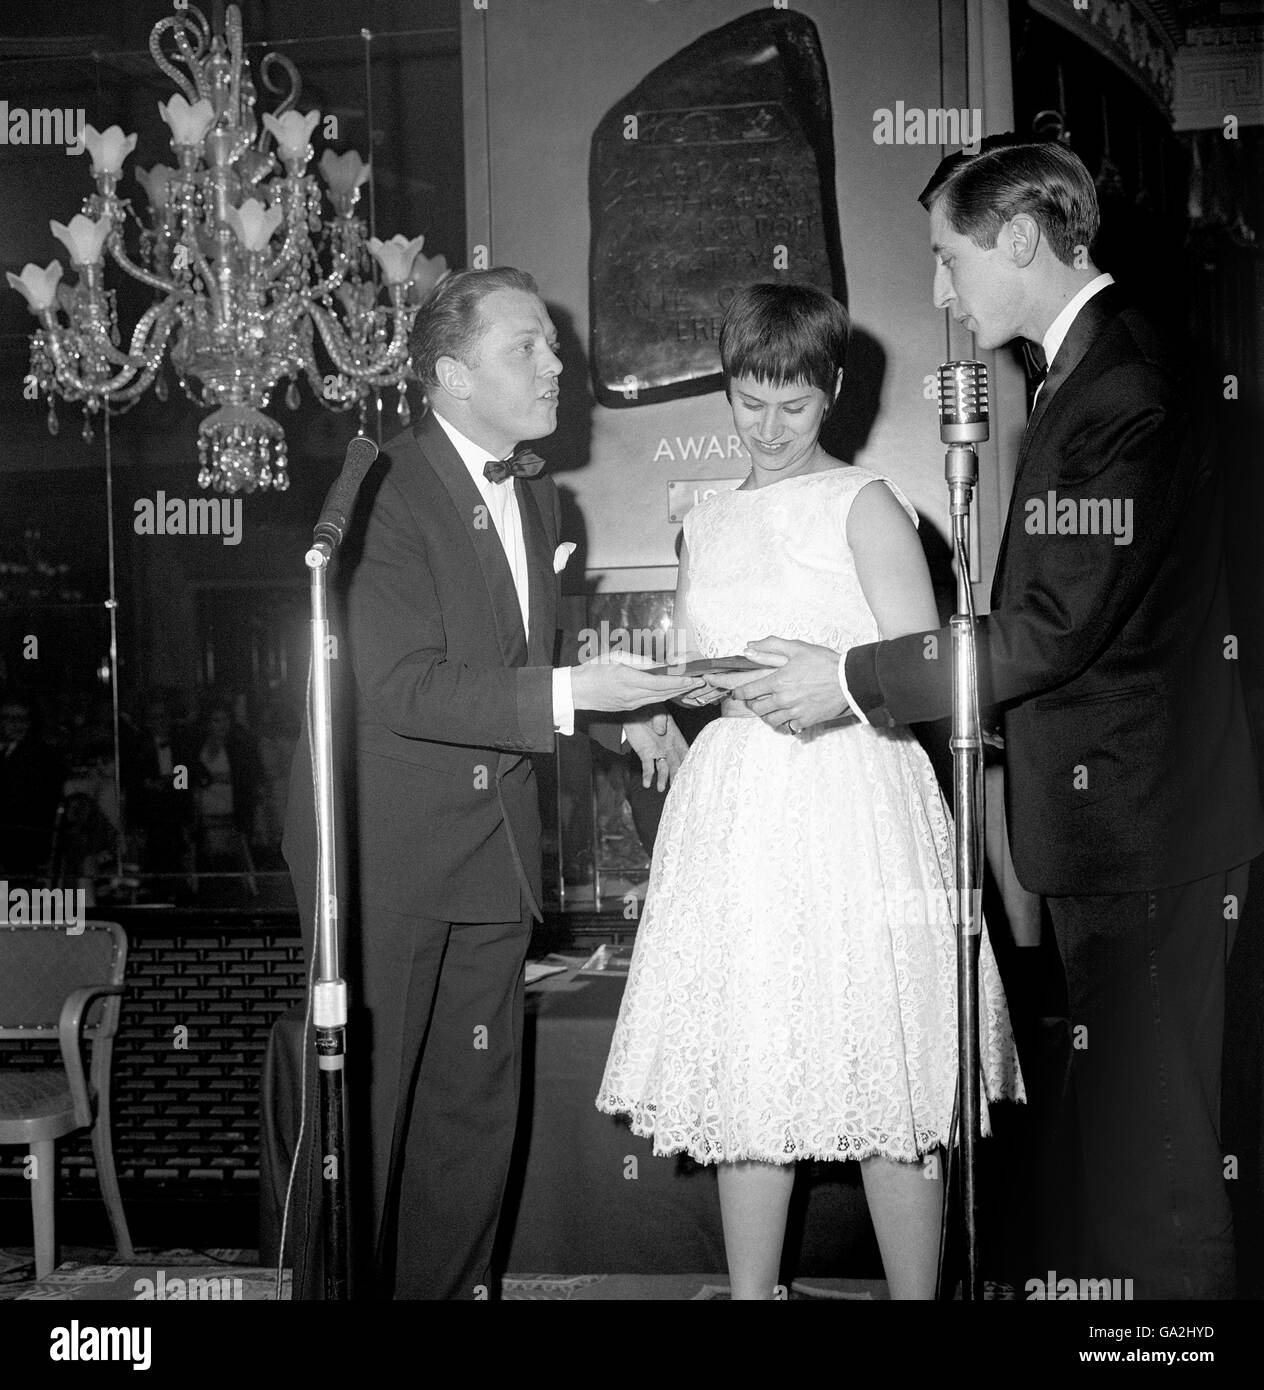 The award for the Best British Dramatic Screenplay in 1961, given to Shelagh Delaney and Tony Richardson for the film 'A Taste of Honey', is accepted on their behalf by Rita Tushingham and Murray Melvin from Richard Attenborough (left) at the first annual awards dinner of the Television and Screen Writers' Guild at the Dorchester Hotel. London. Miss Tushingham and Mr. Melvin gave highly praised performances in the film. Mr. Attenborough was one of a number of stars who presented the Guild's awards to screen writers for films and television in 1961. Stock Photo